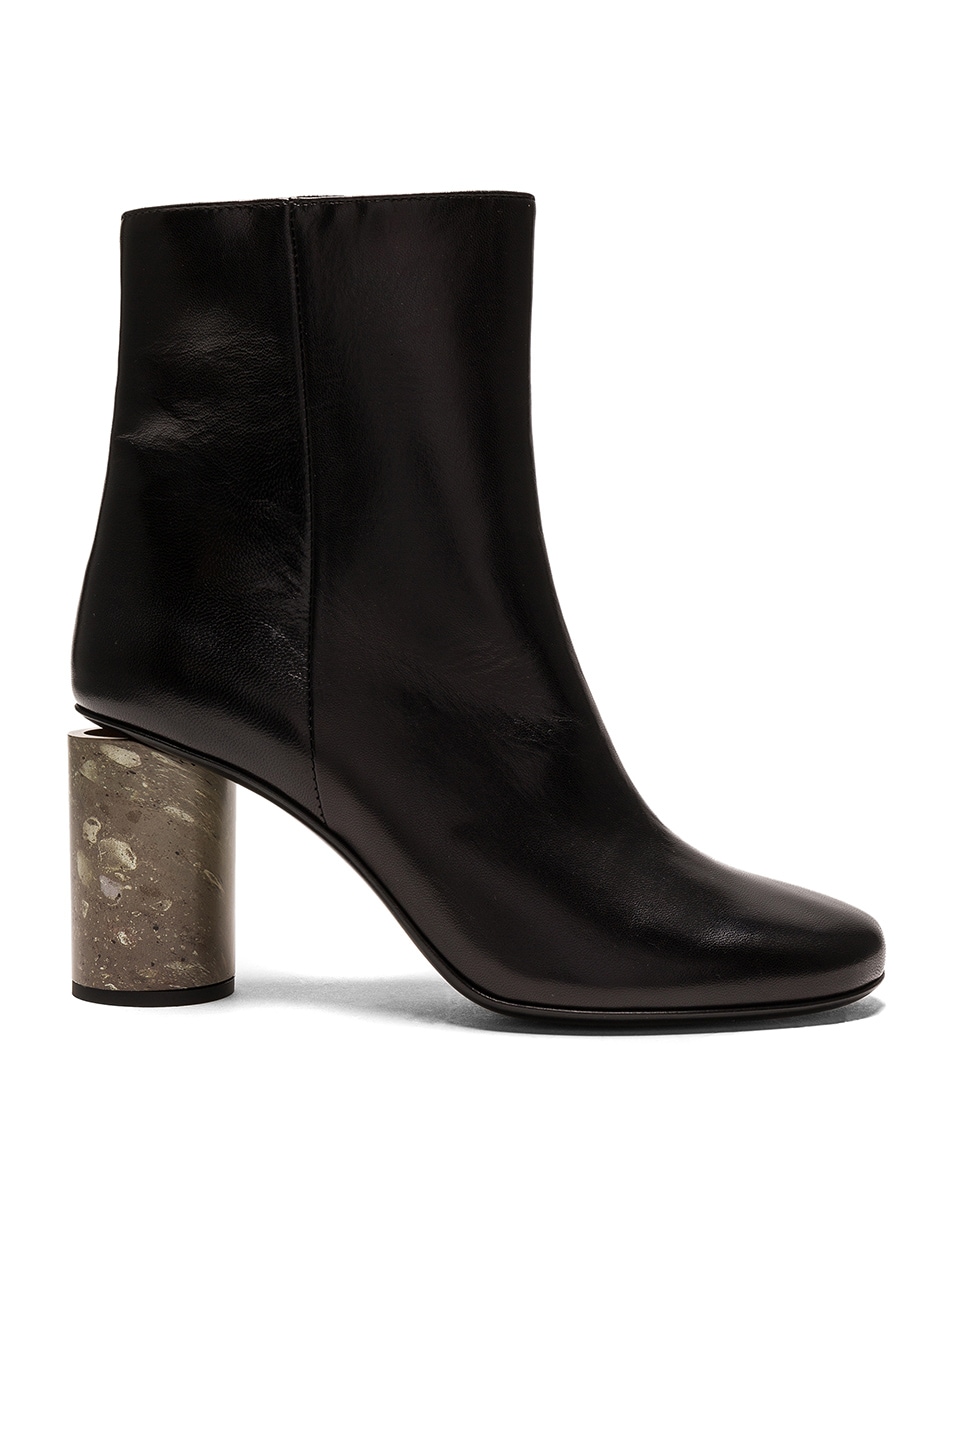 Image 1 of Acne Studios Leather Althea Booties in Black & Light Grey